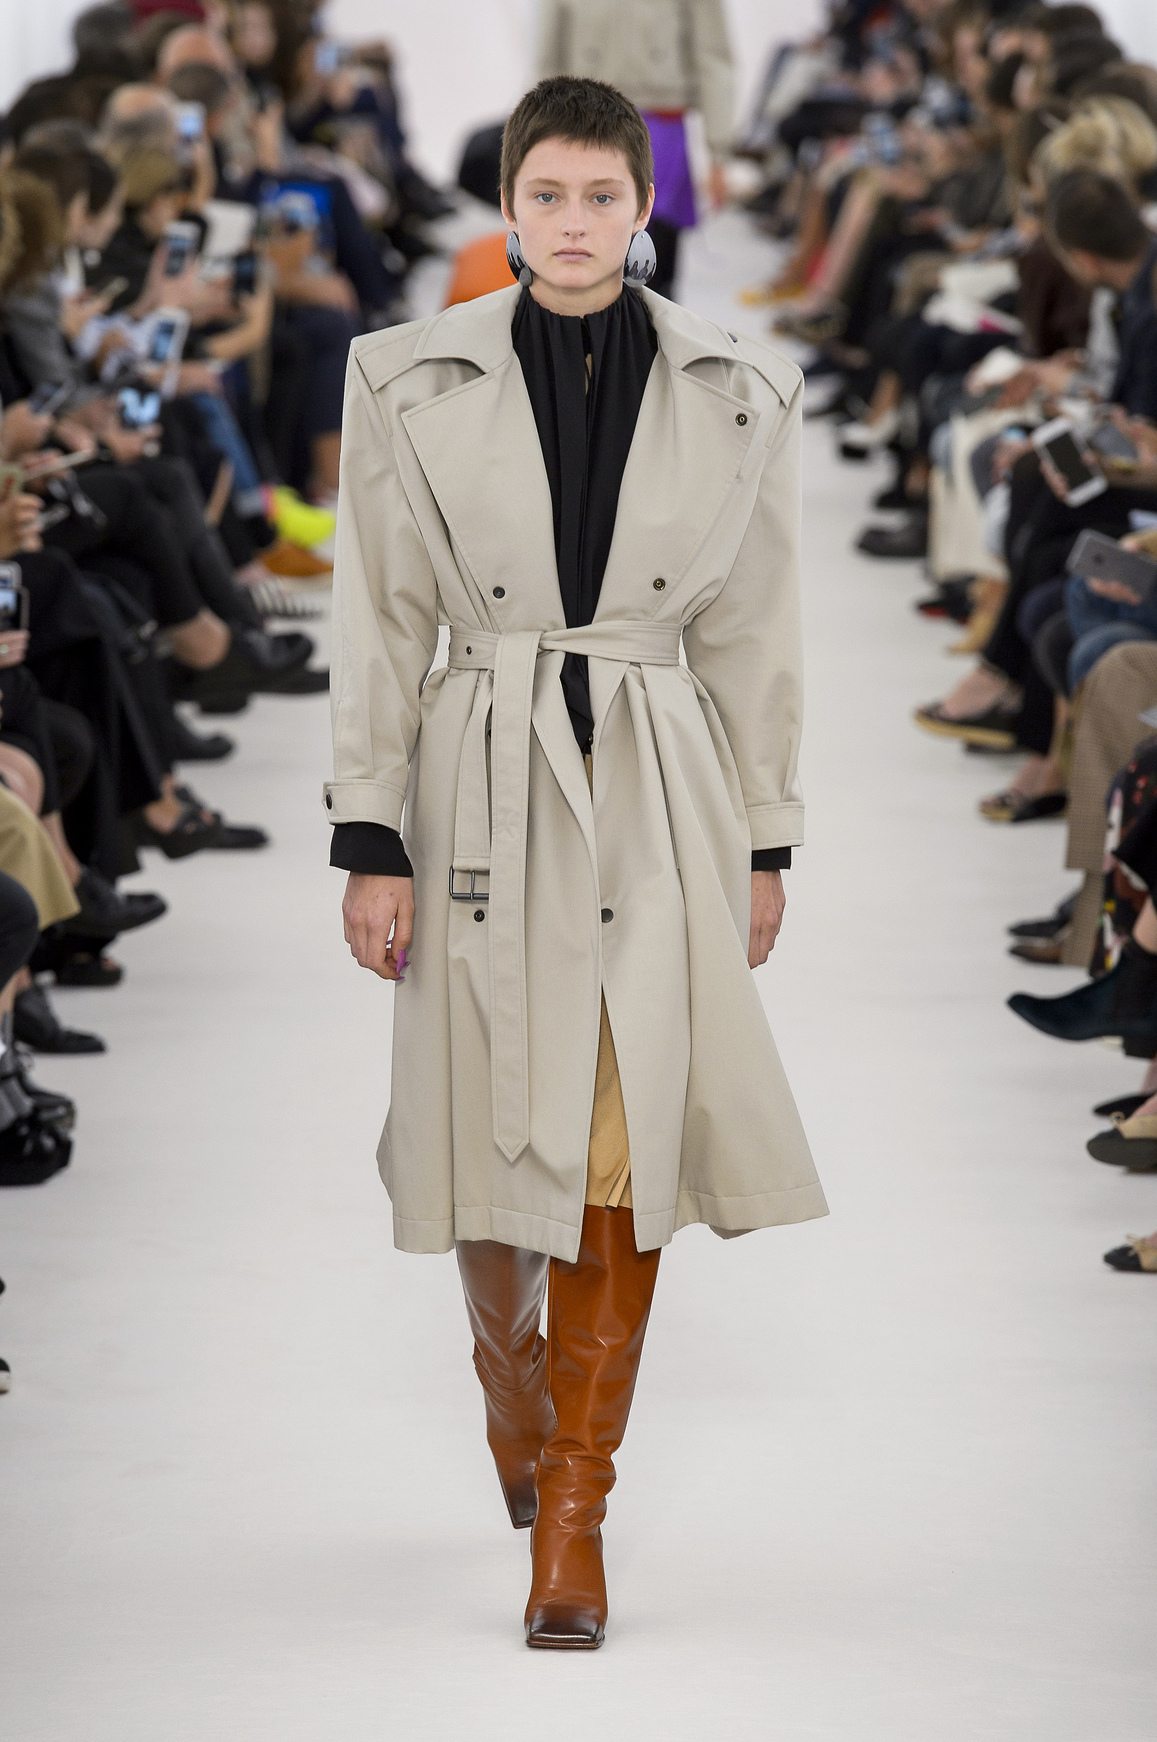 Spring 2017 Trend Report: How to Wear the Trench Coat - FASHION Magazine